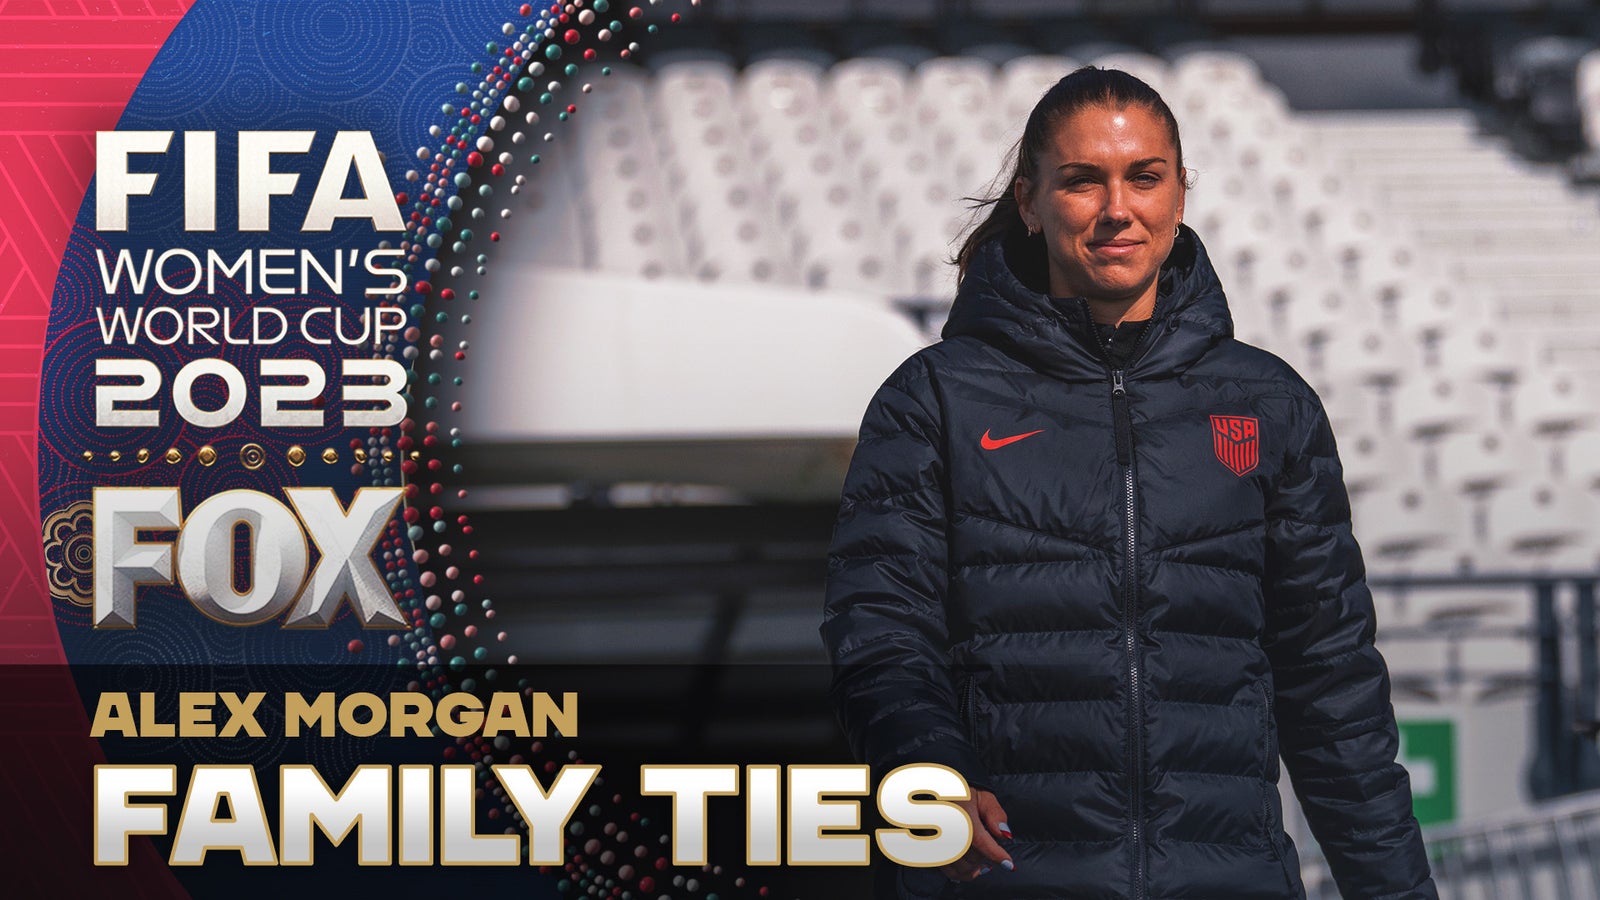 "He's just the ultimate soccer dad" — Alex Morgan on father Mike's support